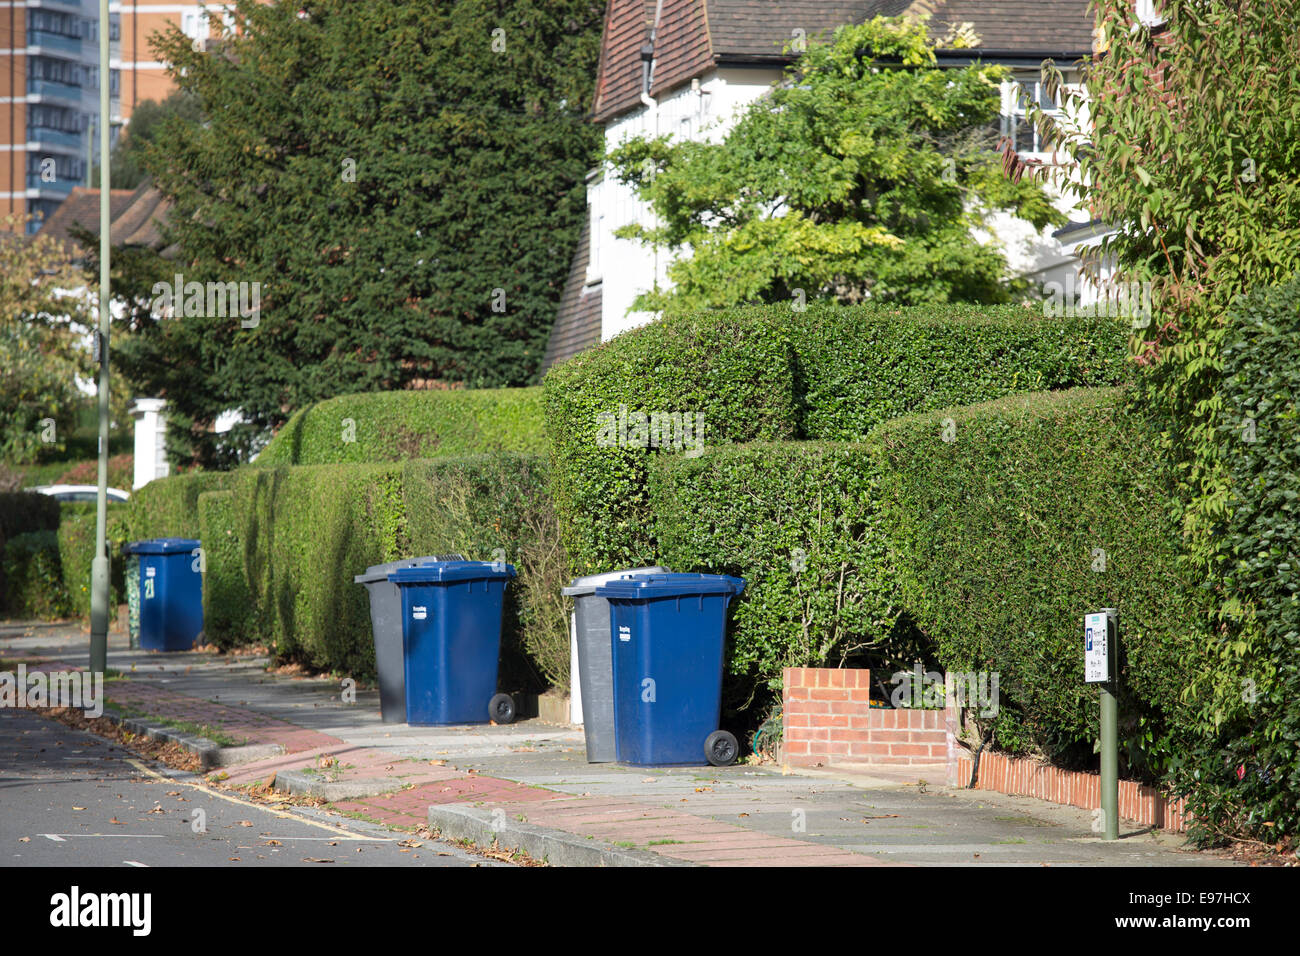 Bins recycling bin hedges out for dustman hedges Stock Photo